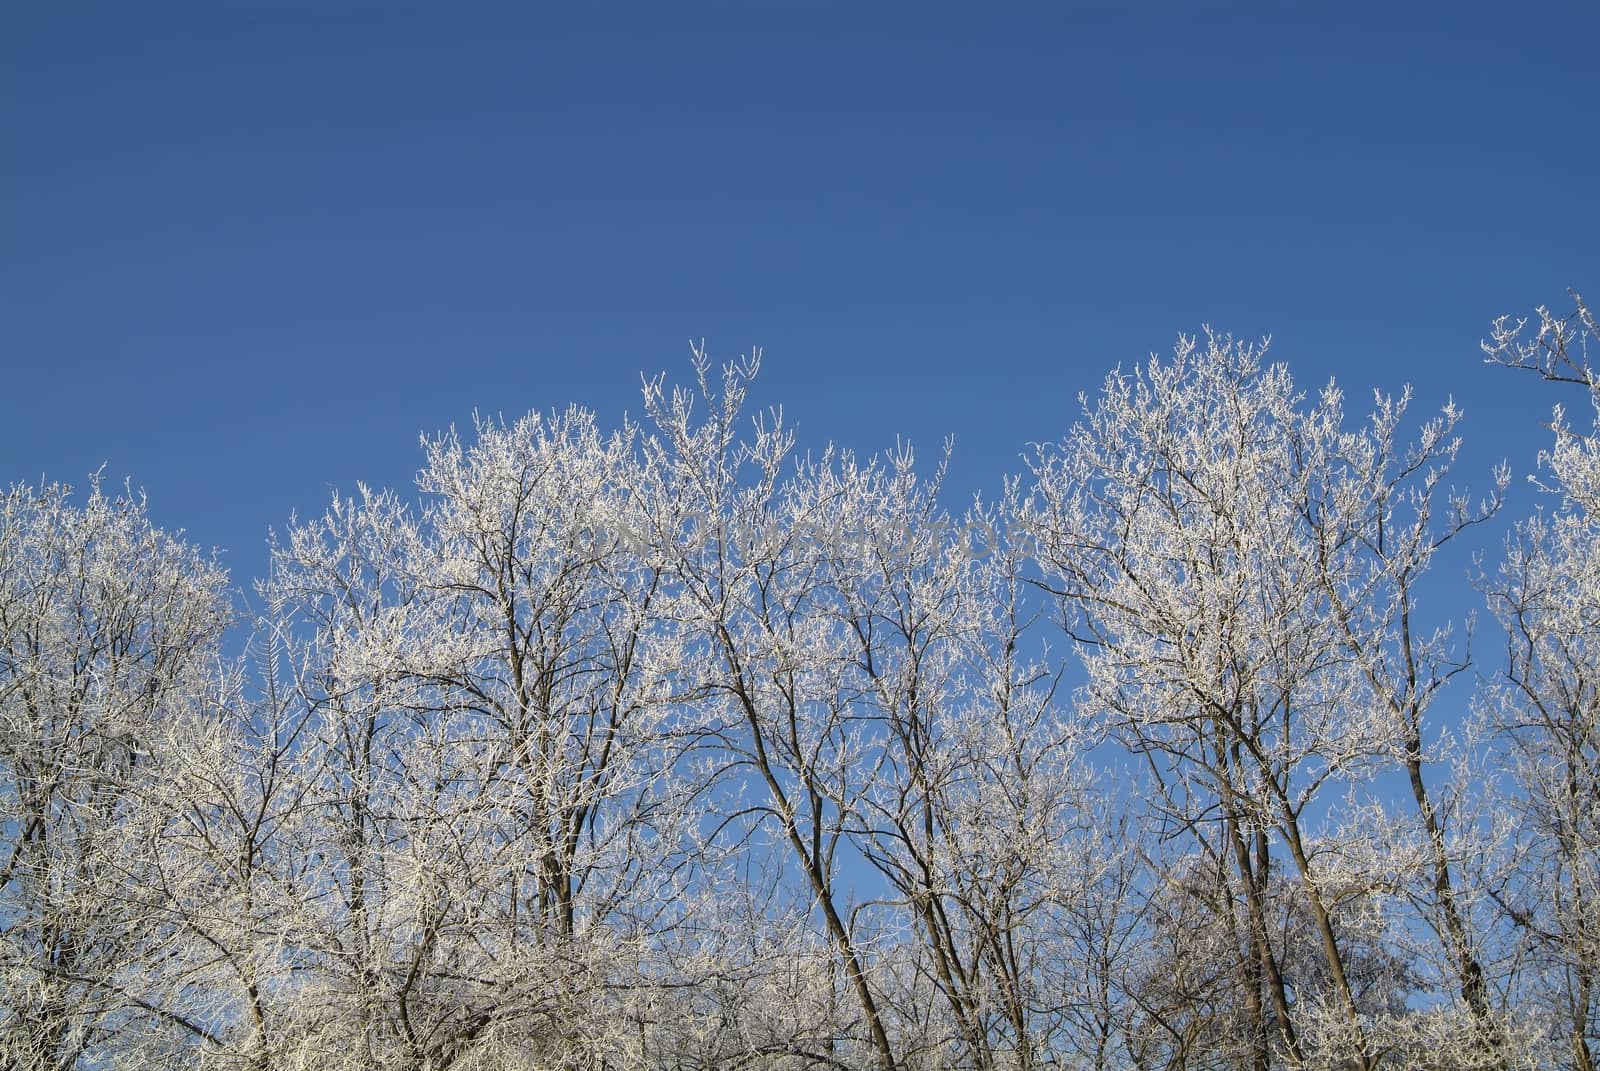 hoarfrost on a branch against blue sky by romeocharly